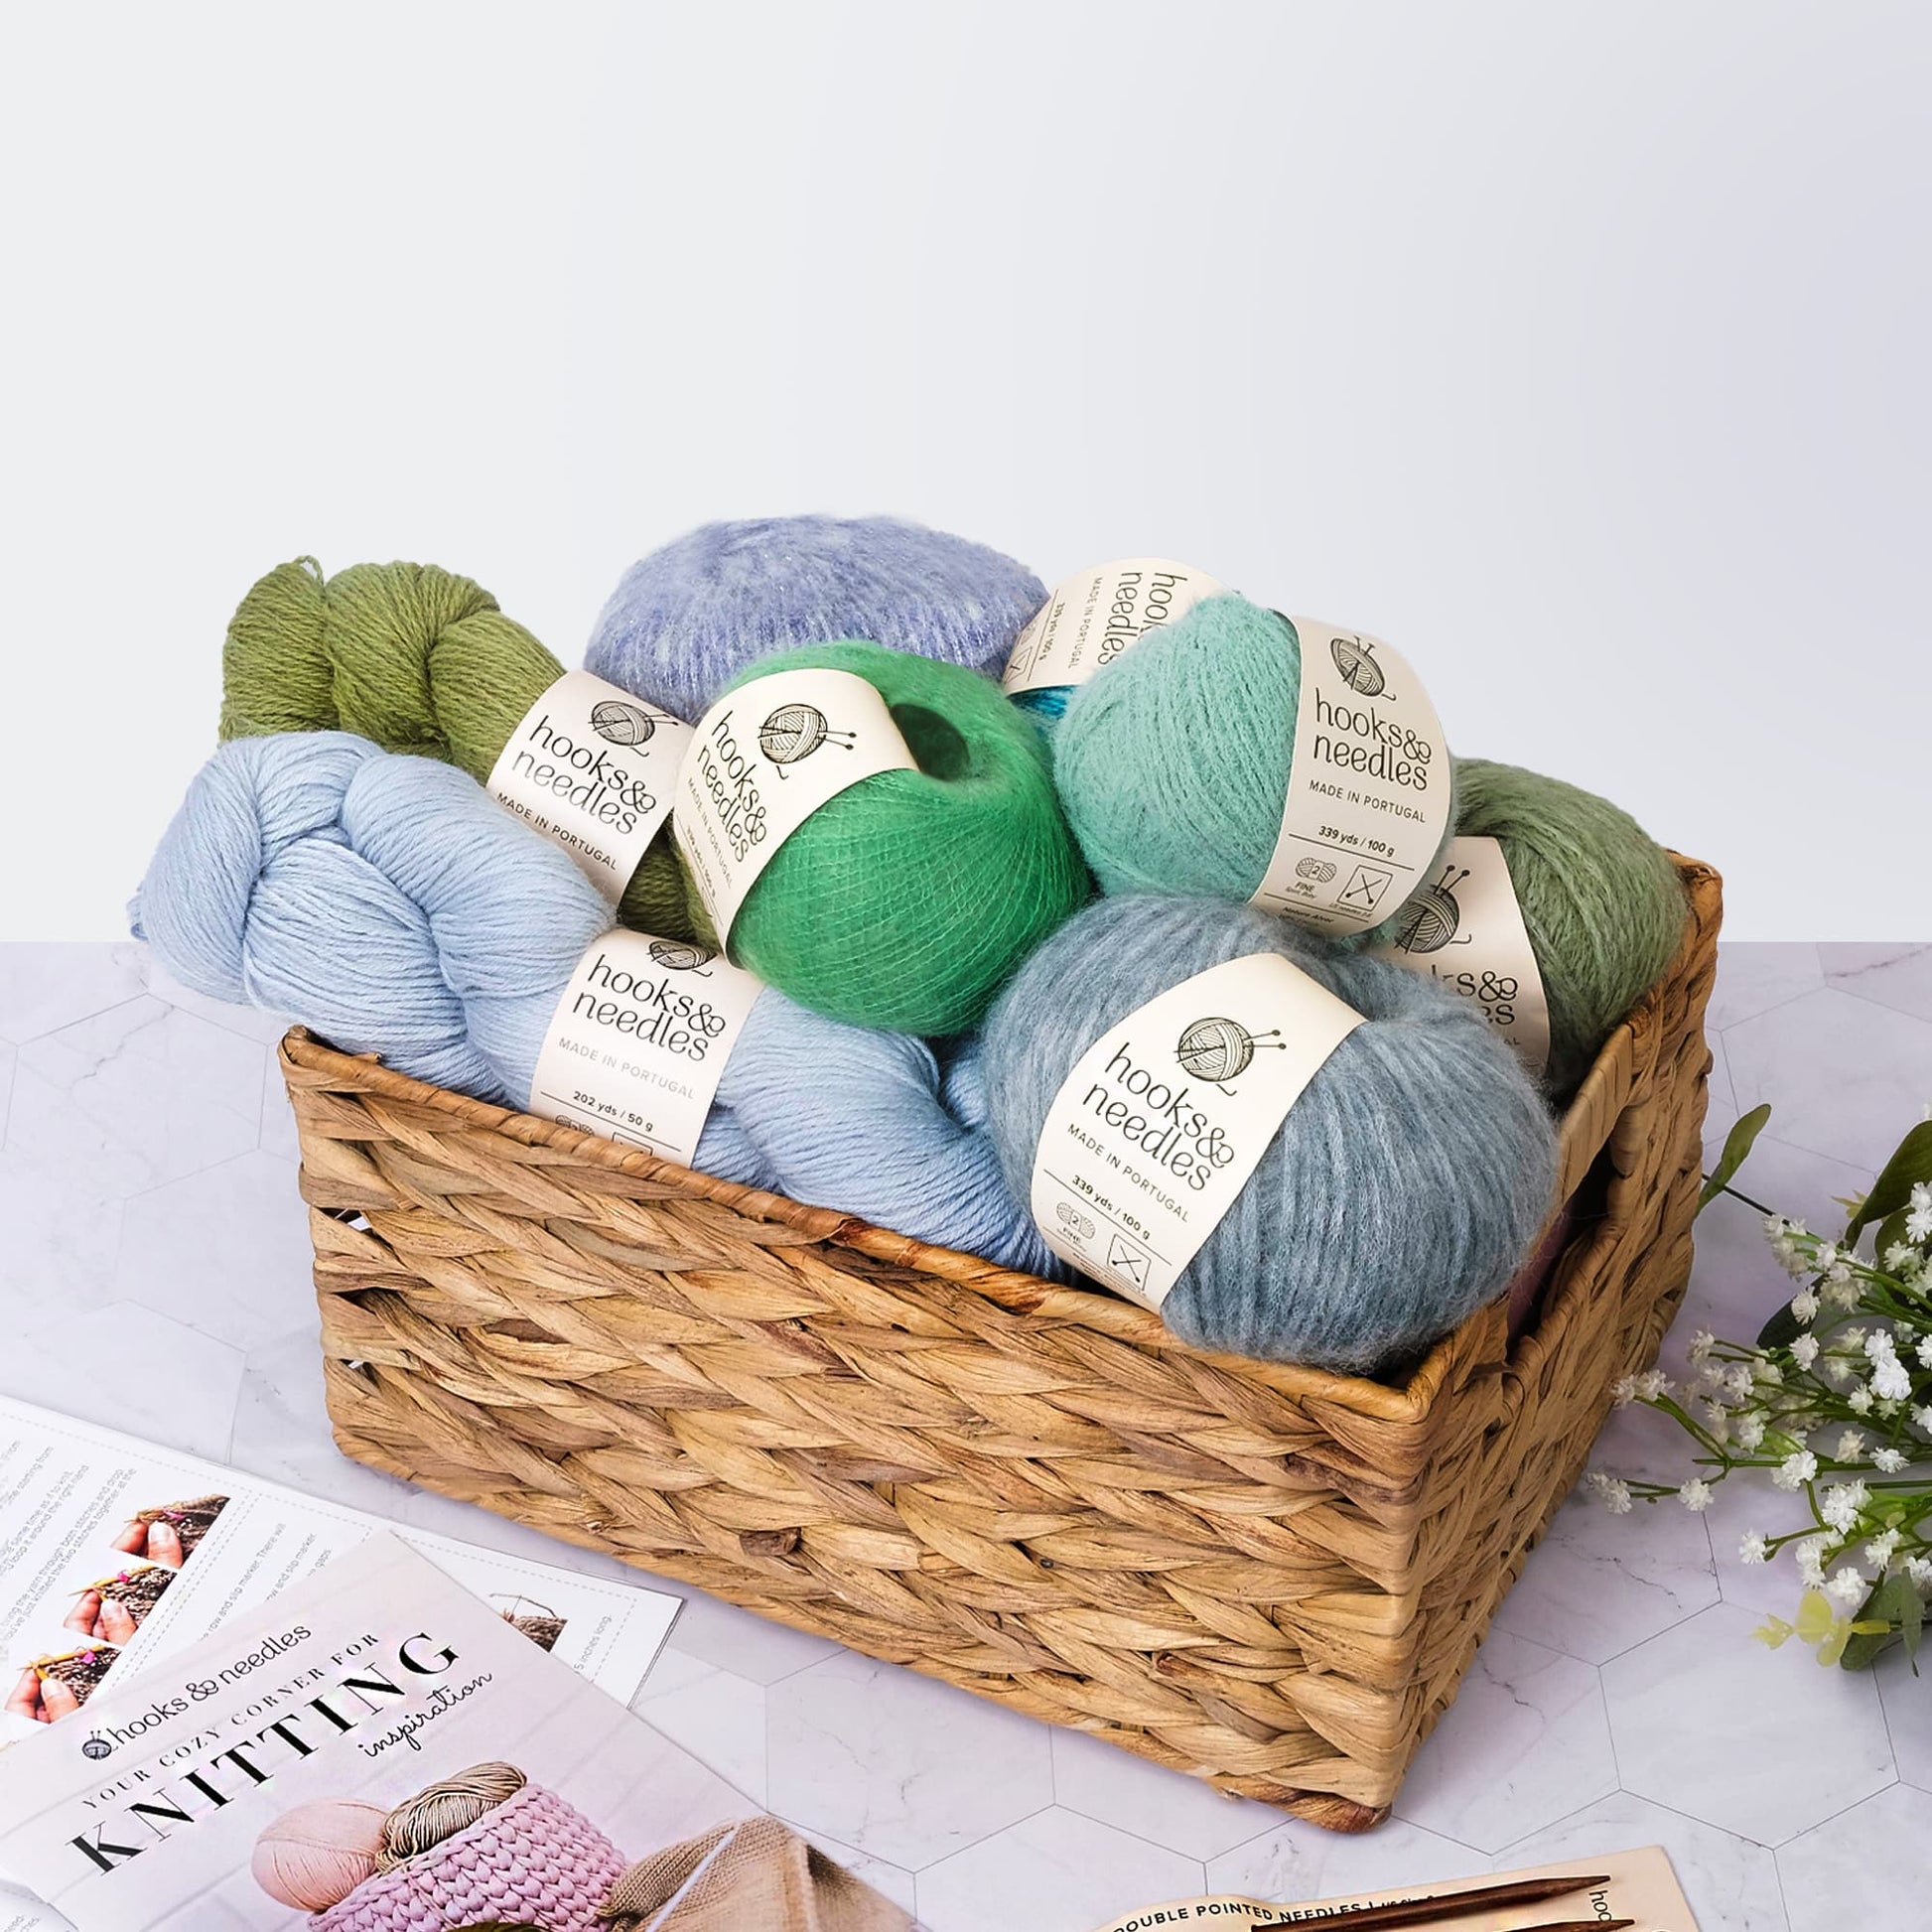 A Hooks & Needles Subscription Box in a woven basket with knitting magazines on the side.